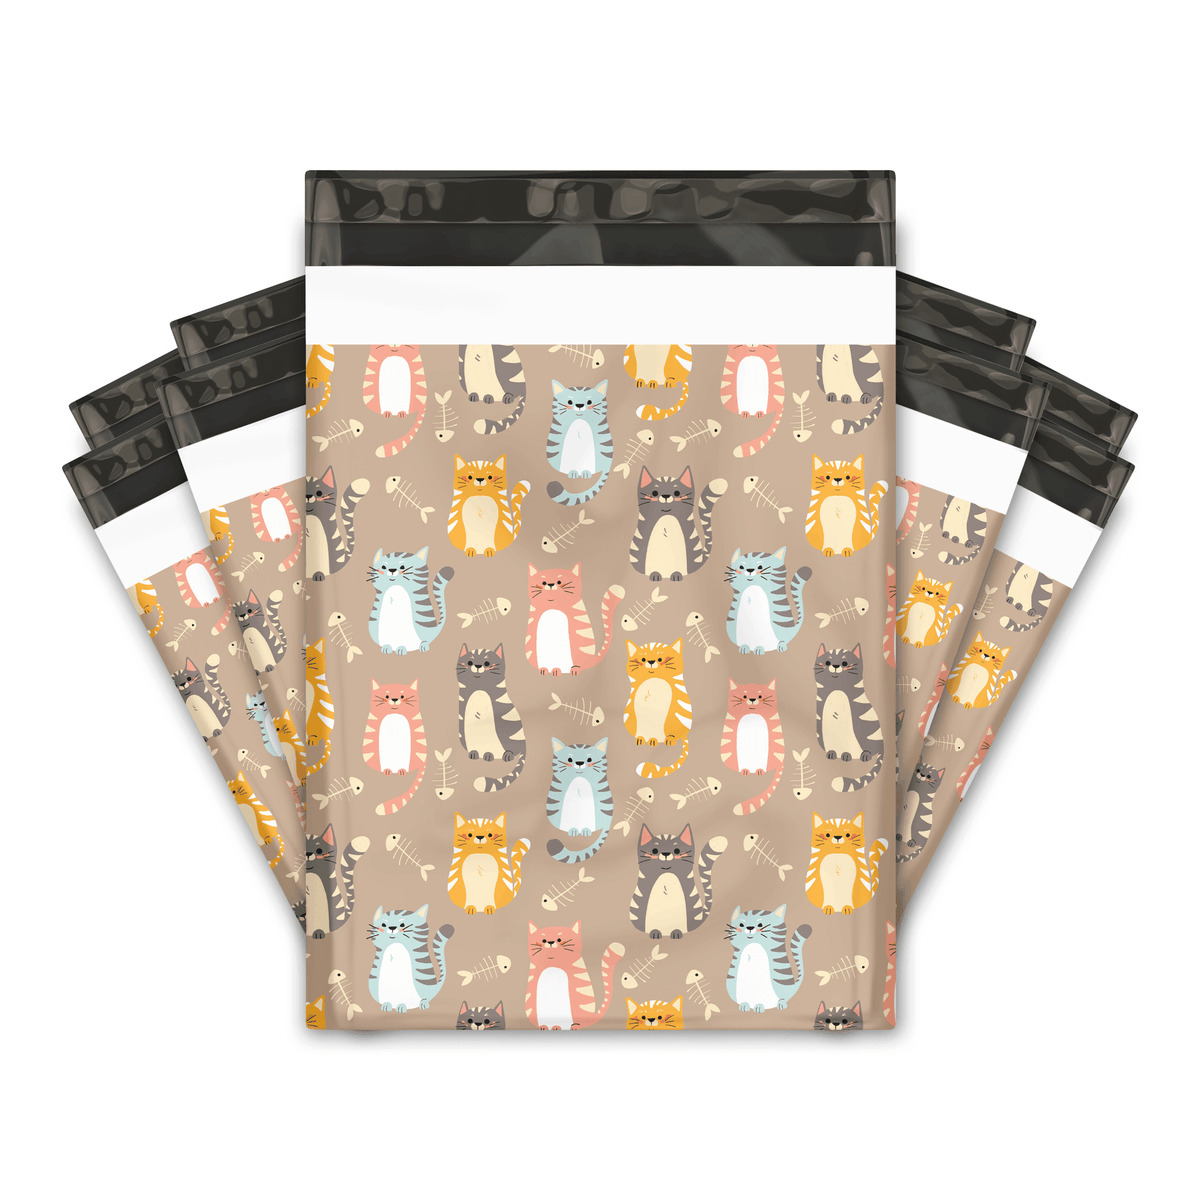 10x13 Cats Designer Poly Mailers Shipping Envelopes Premium Printed Bags Pro Supply Global